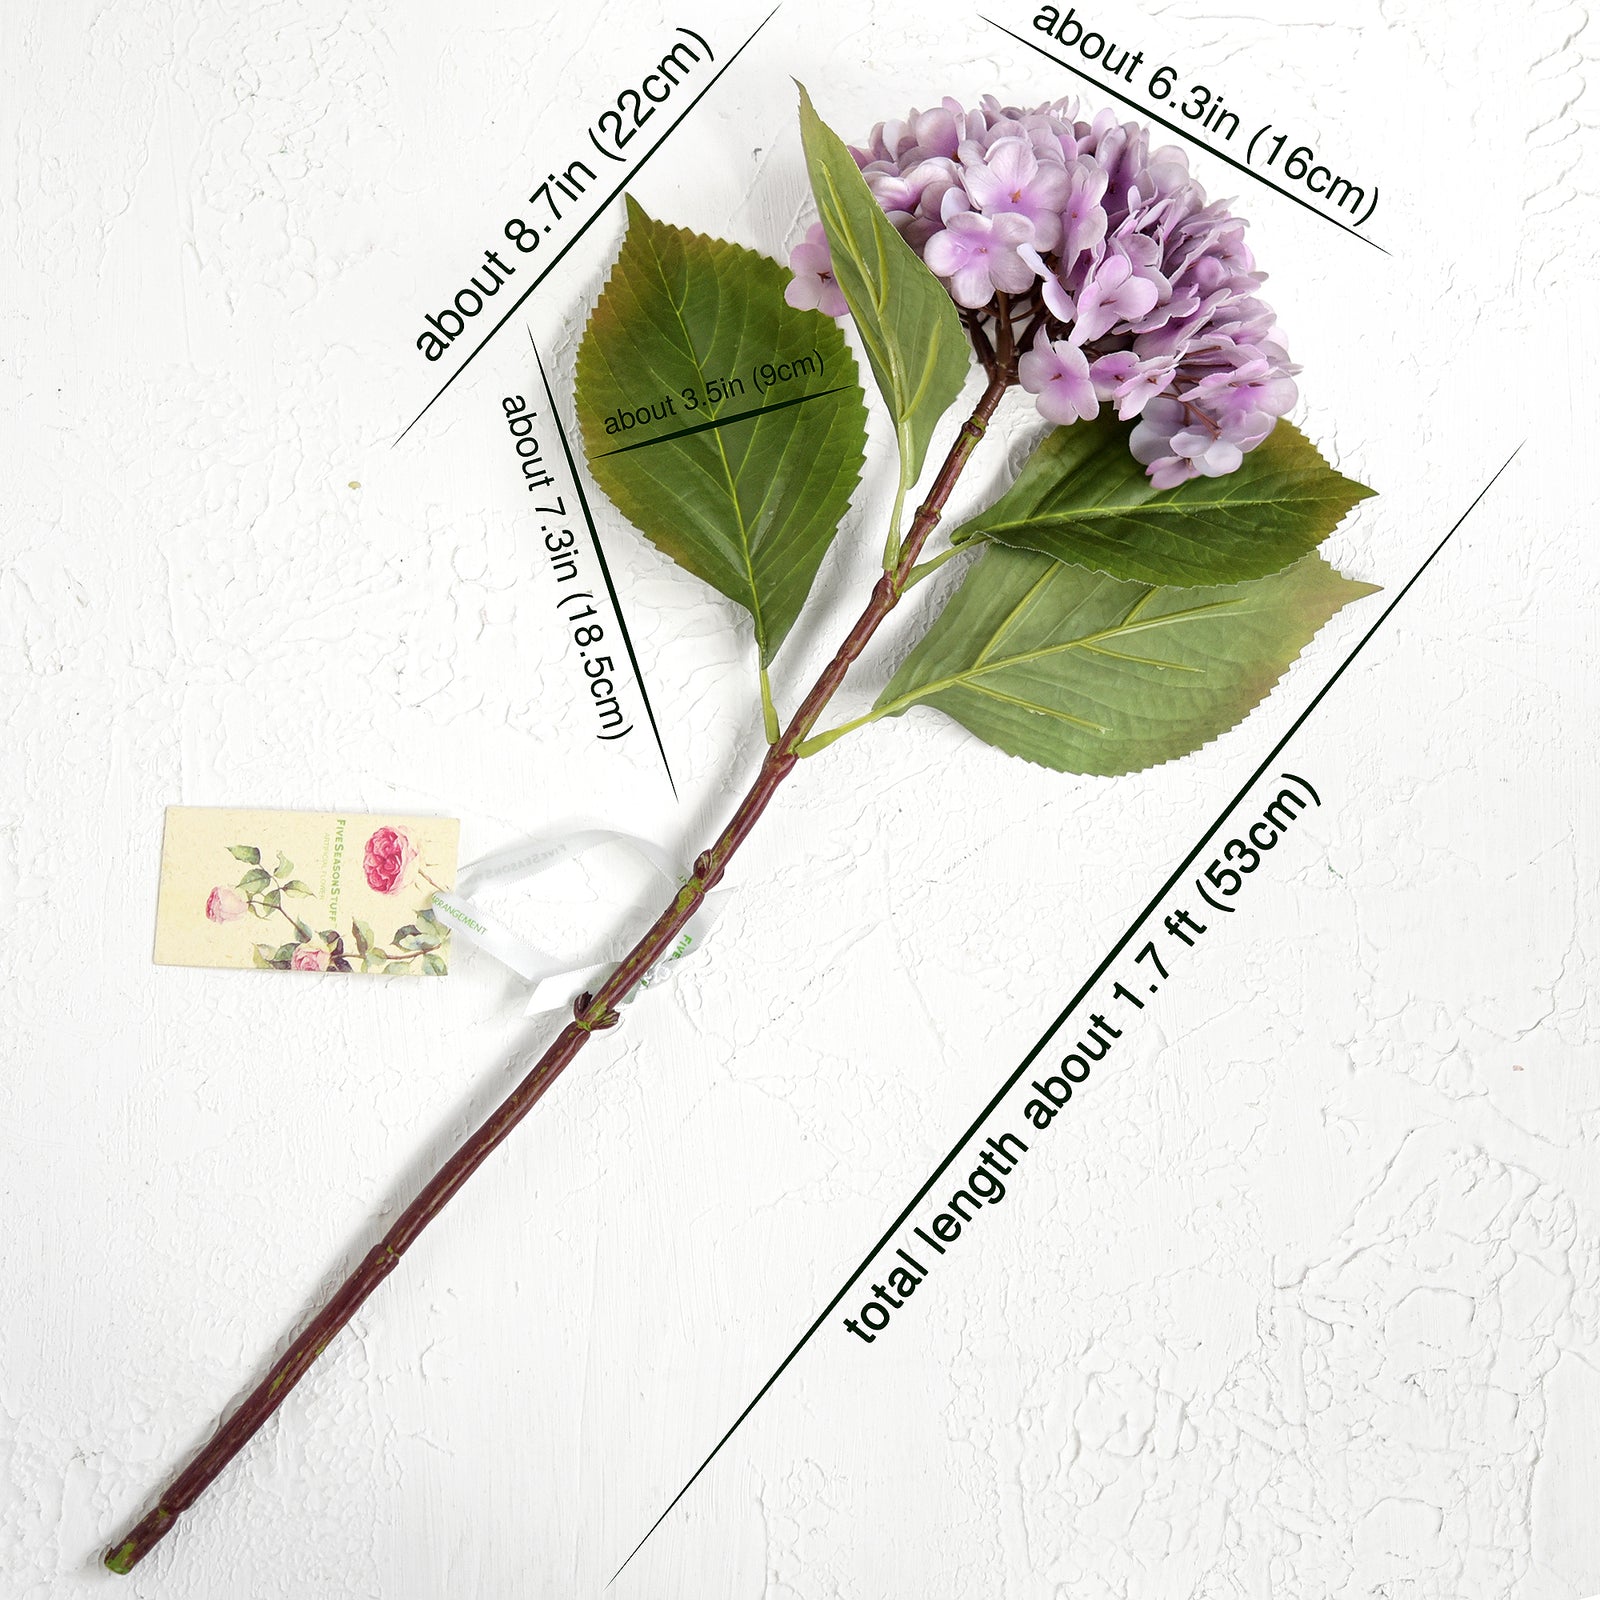 2 Long Stems Real Touch Hydrangea Artificial Flowers (Light Lavender Lilac) Lifelike, Elegant, and Versatile Decor for Any Occasion